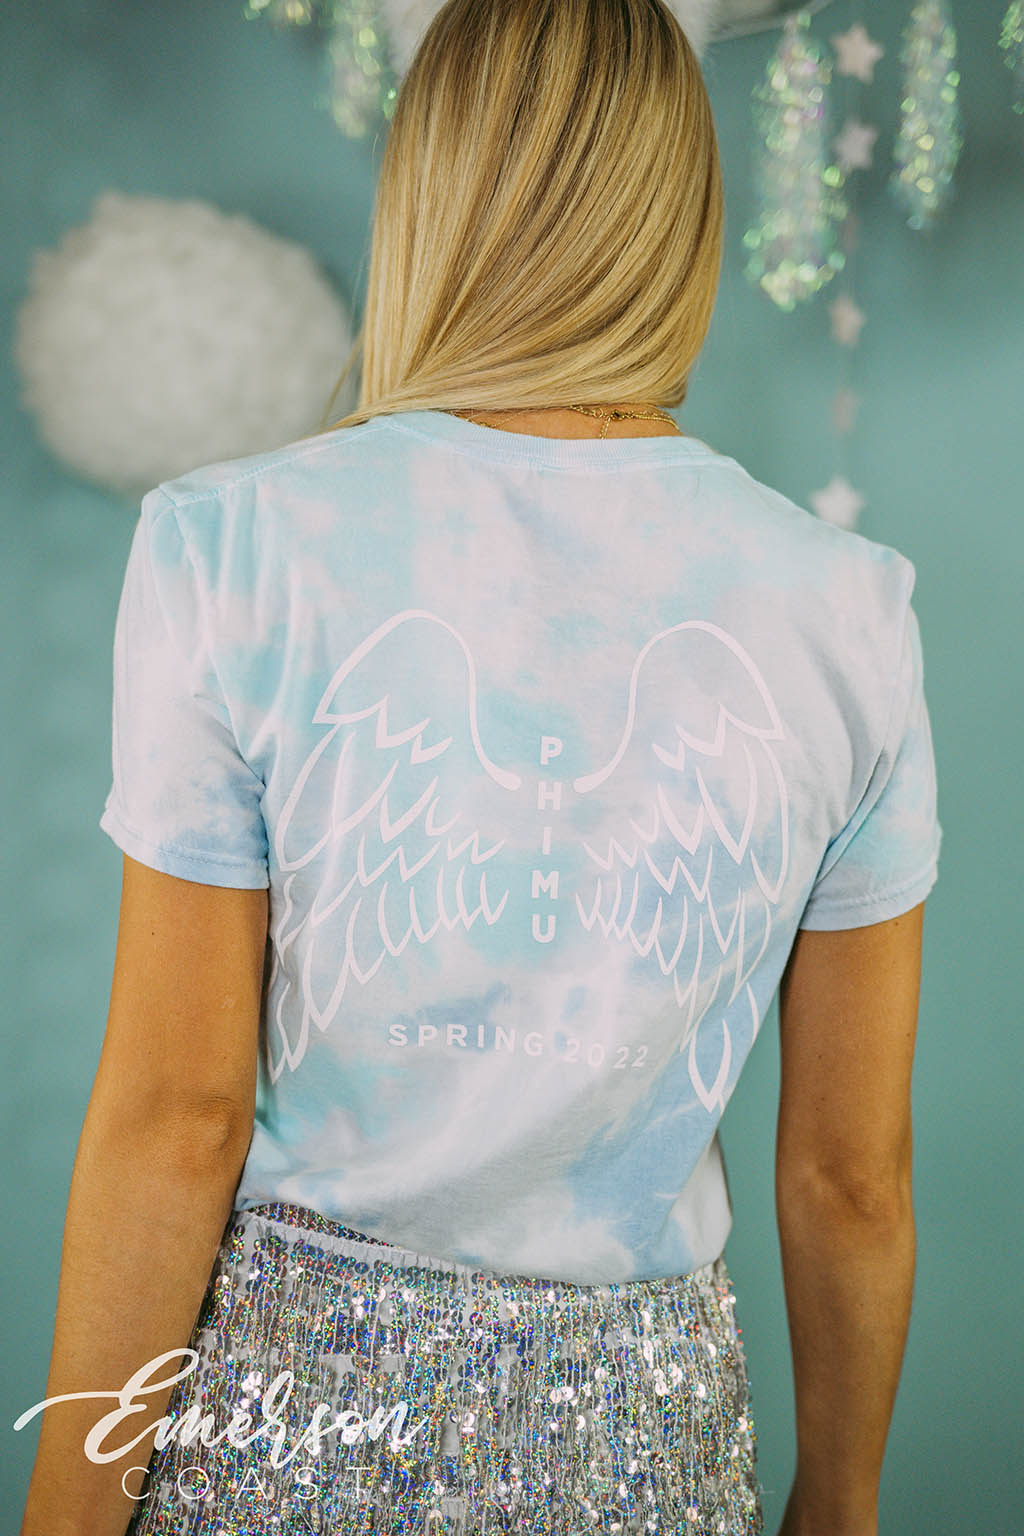 DPHIE Gives You Wings Blue Tie Dye Tee